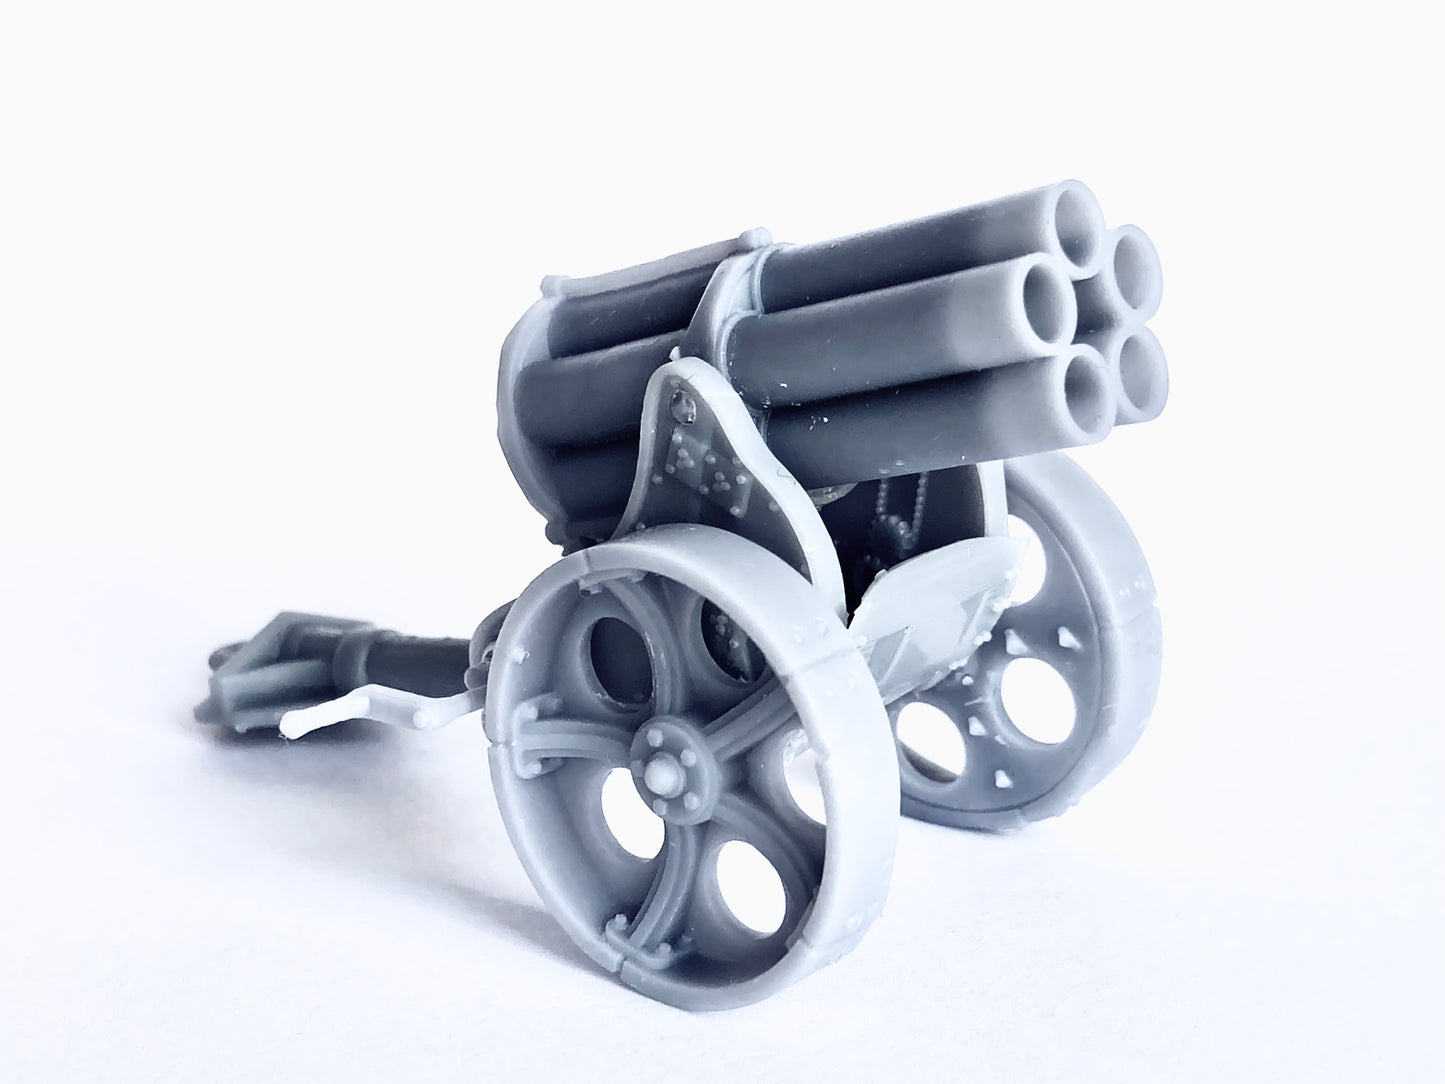 Multiple Rocket Launcher Nebelwerfer - 28mm Steampunk Inspired by Curious Constructs